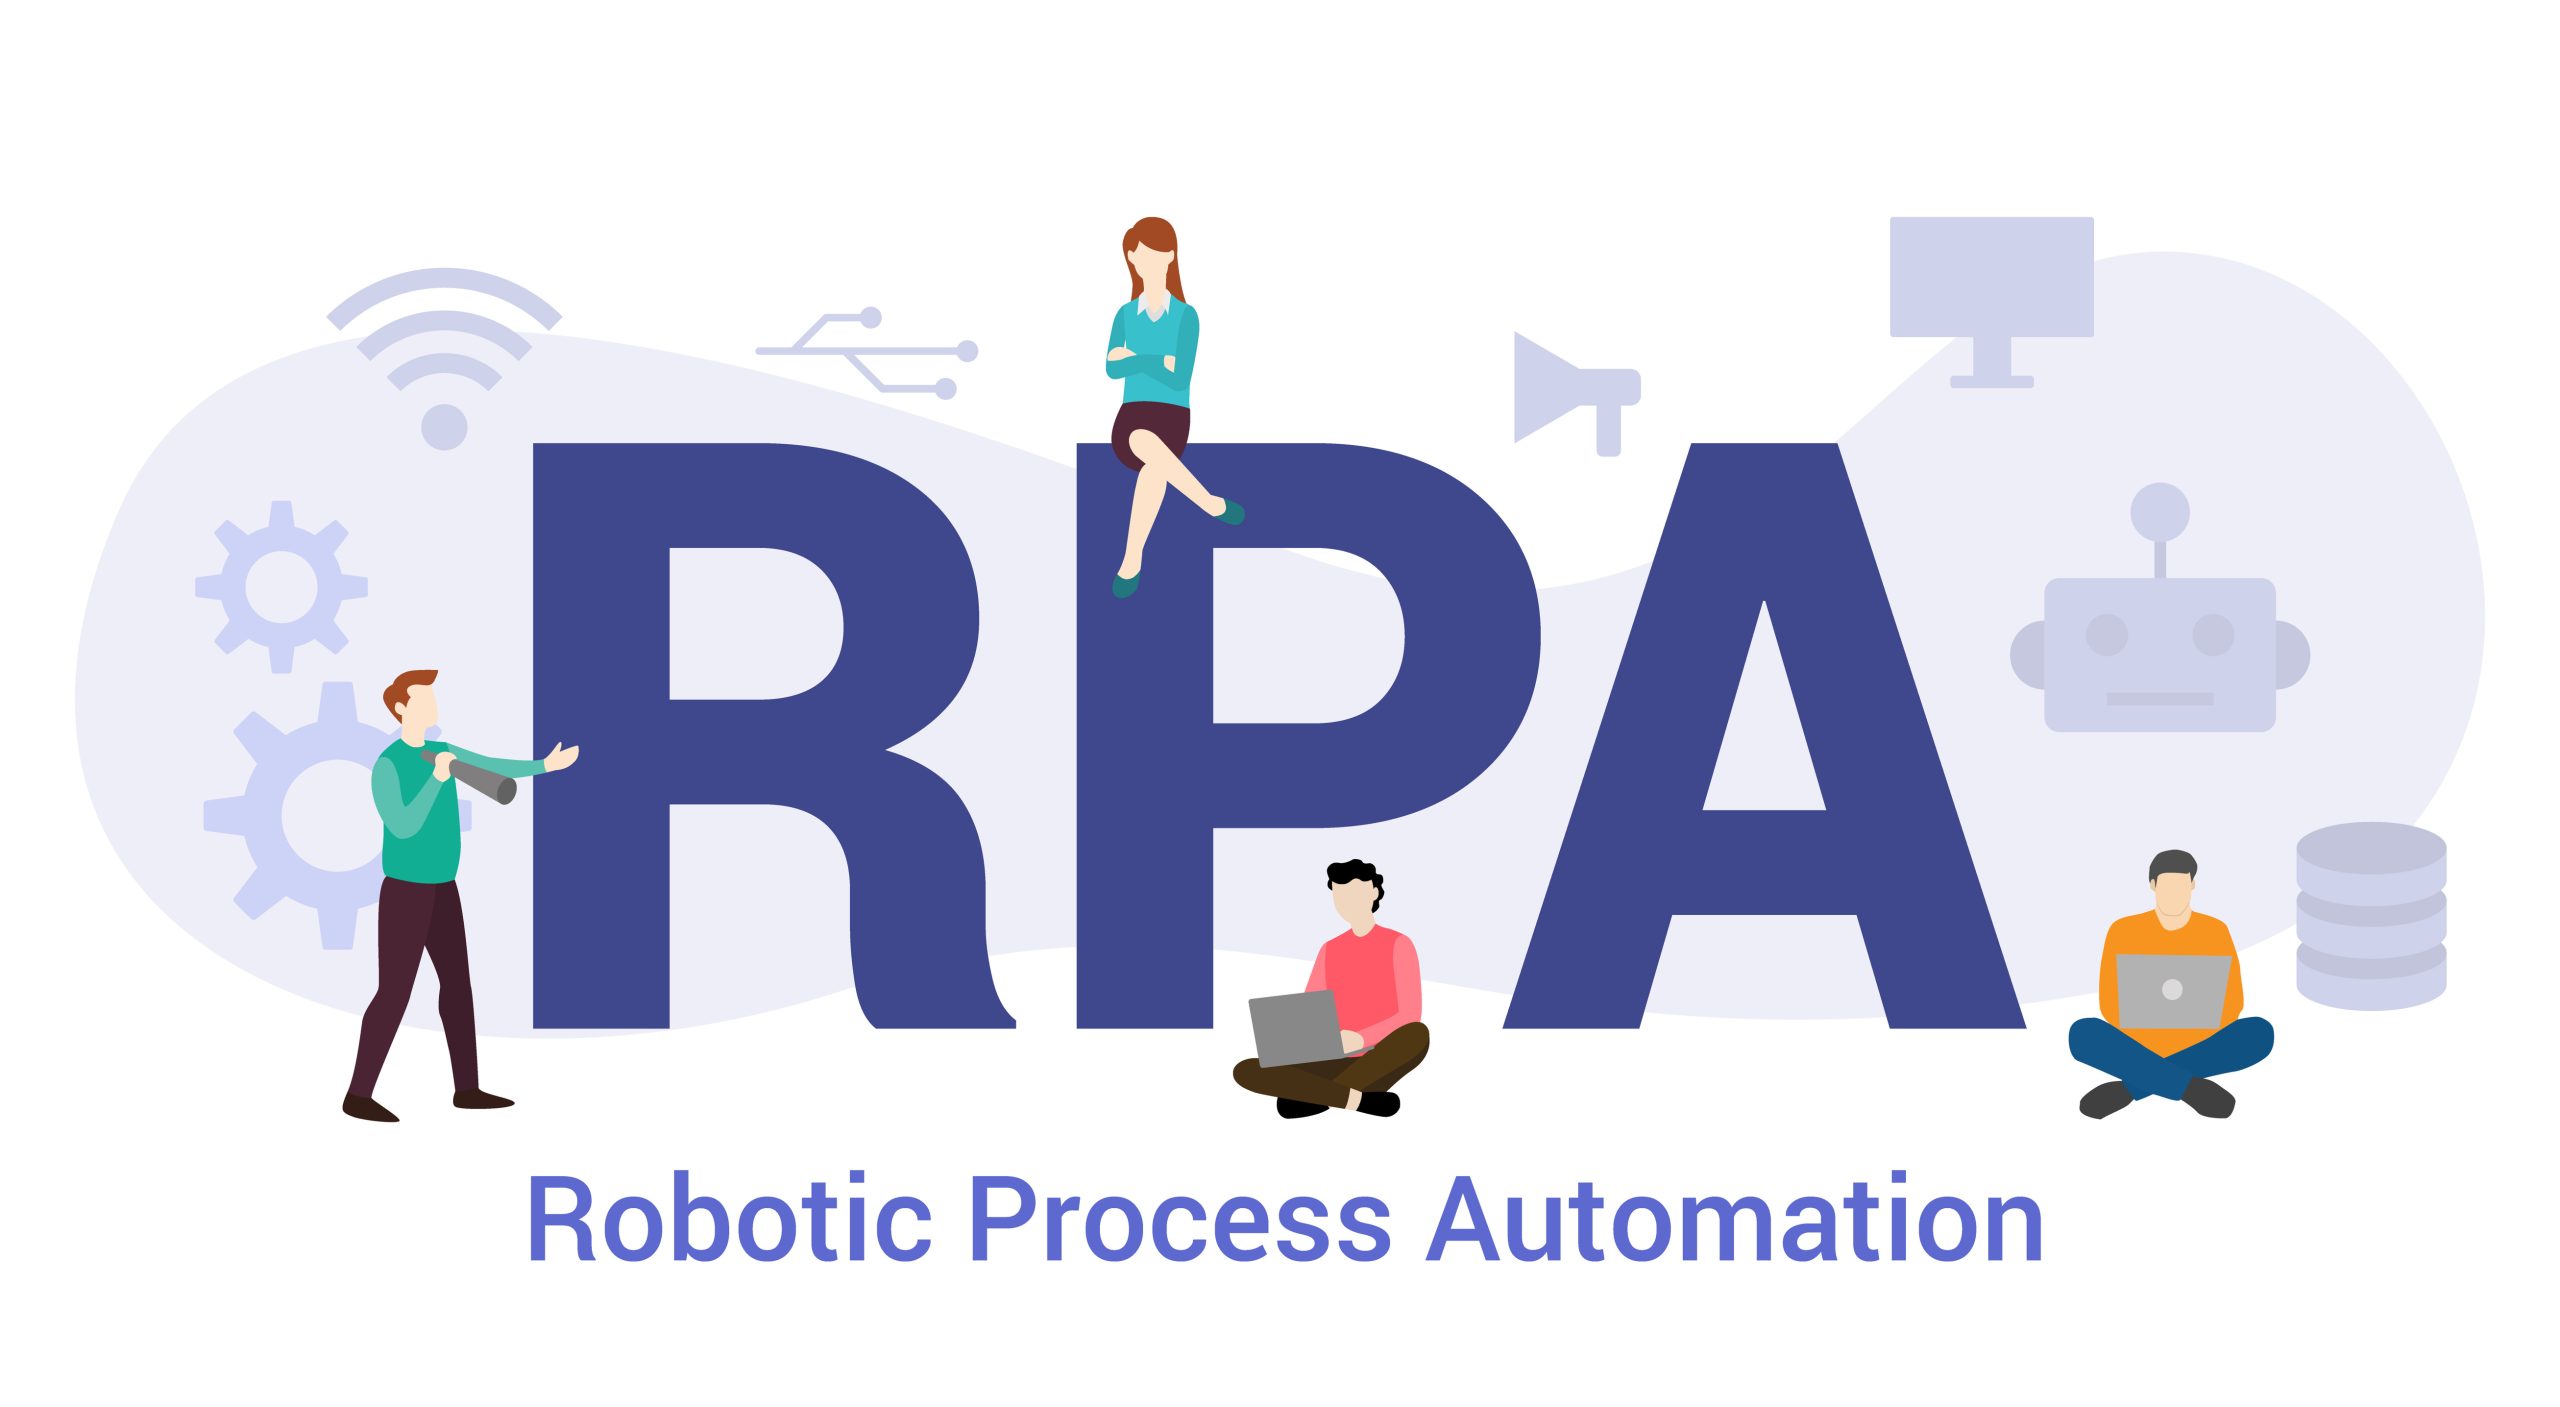 RPA maturity model with human component